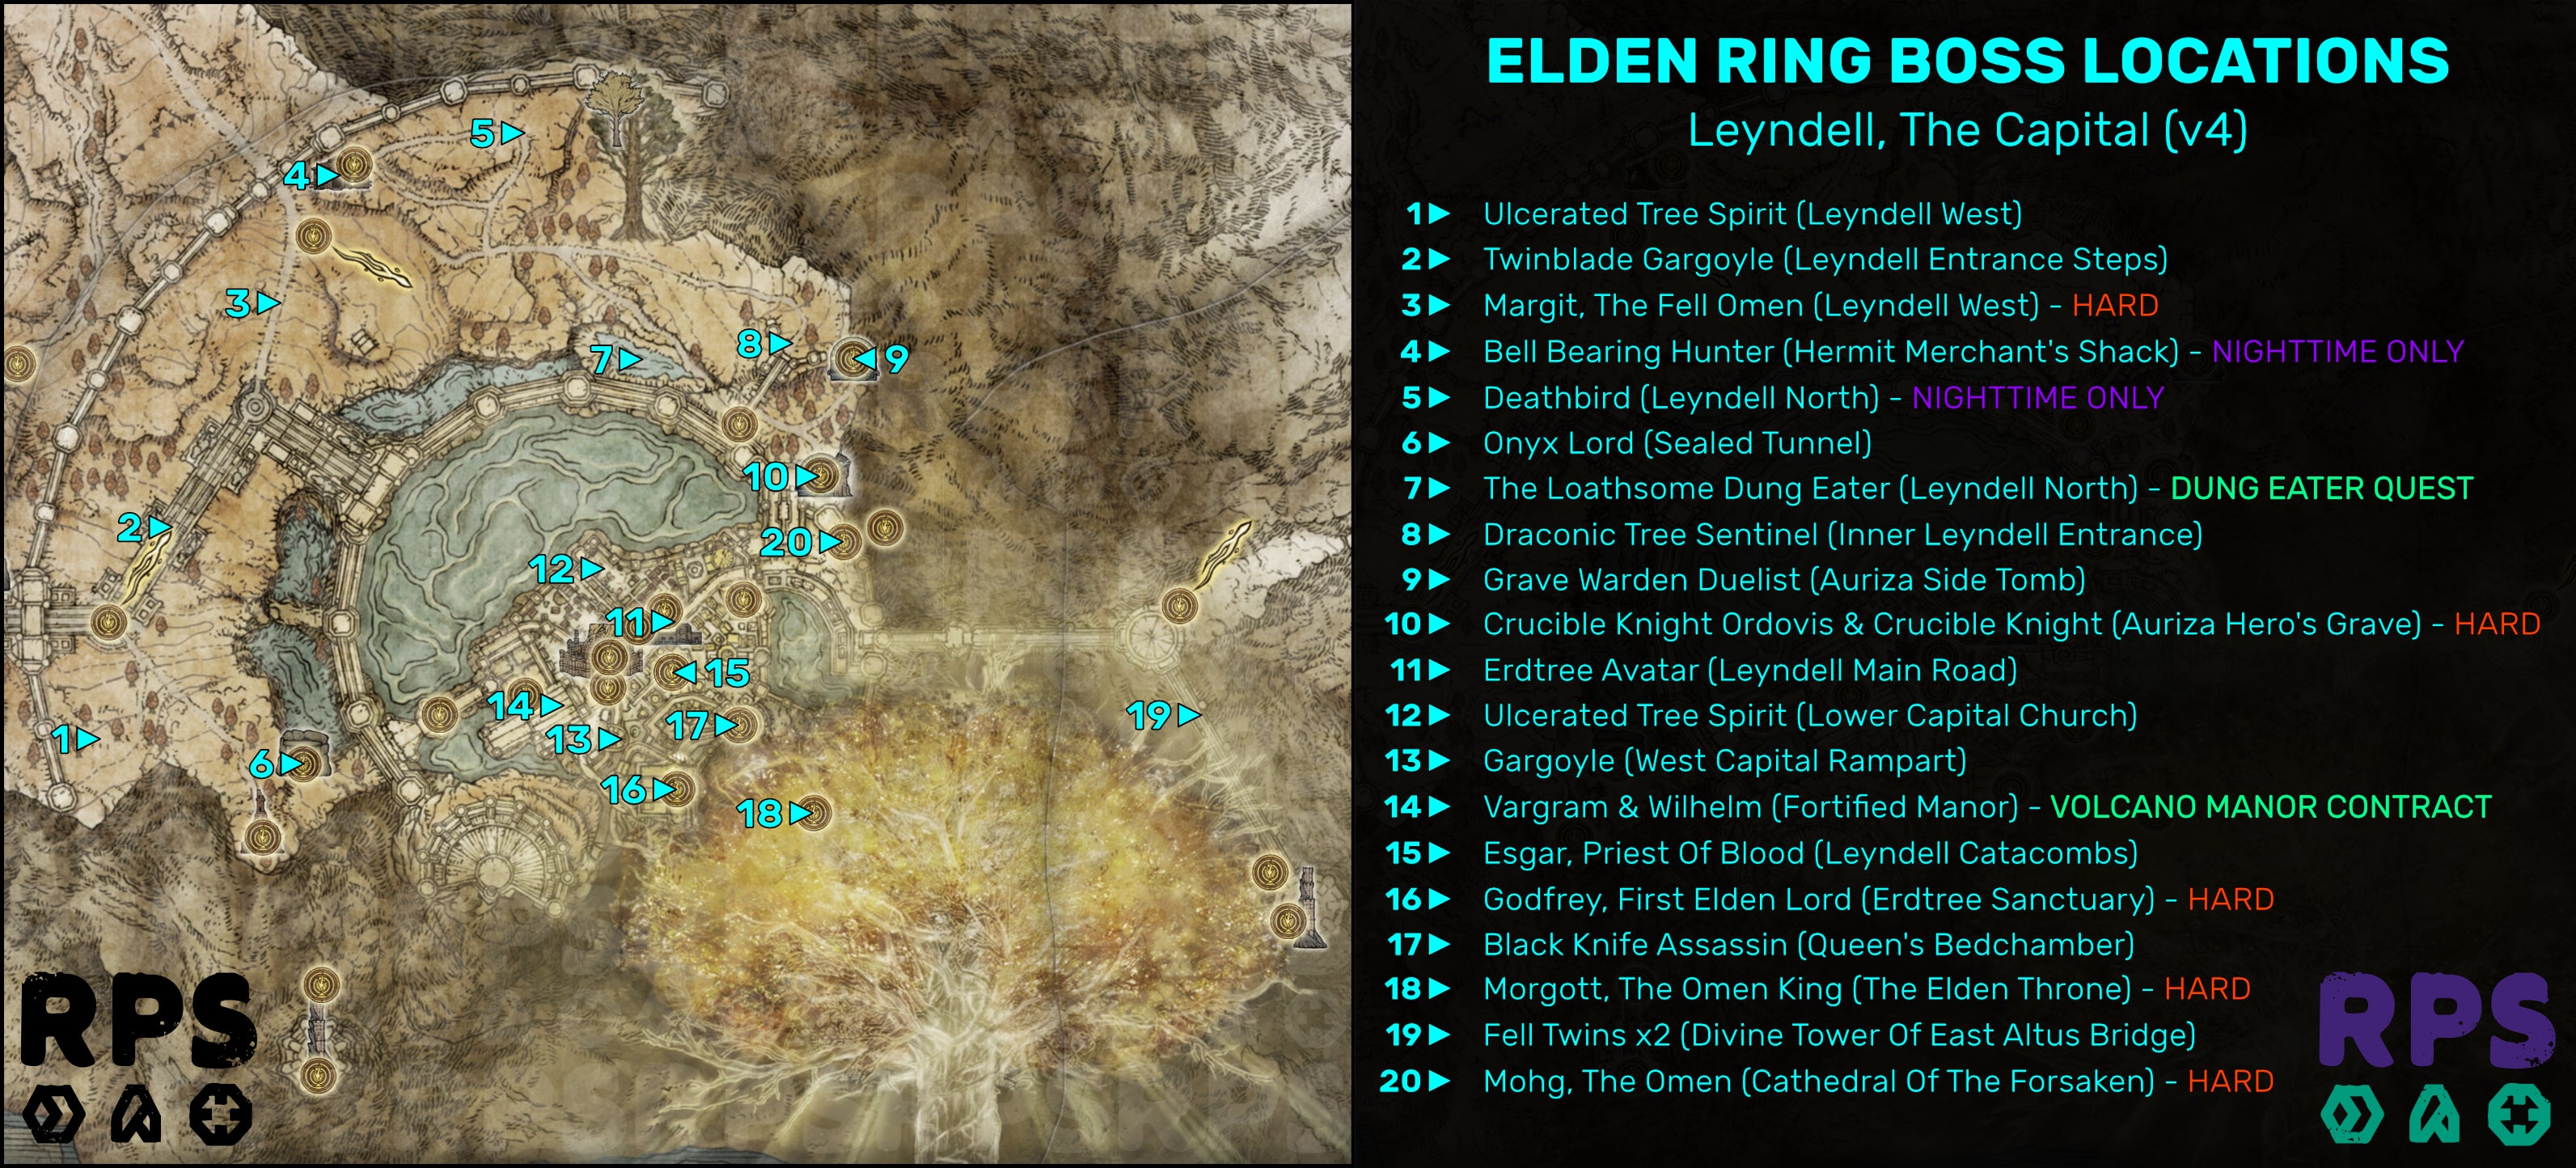 A map of Leyndell, the Capital in Elden Ring, with the locations of every single boss encounter marked and numbered.